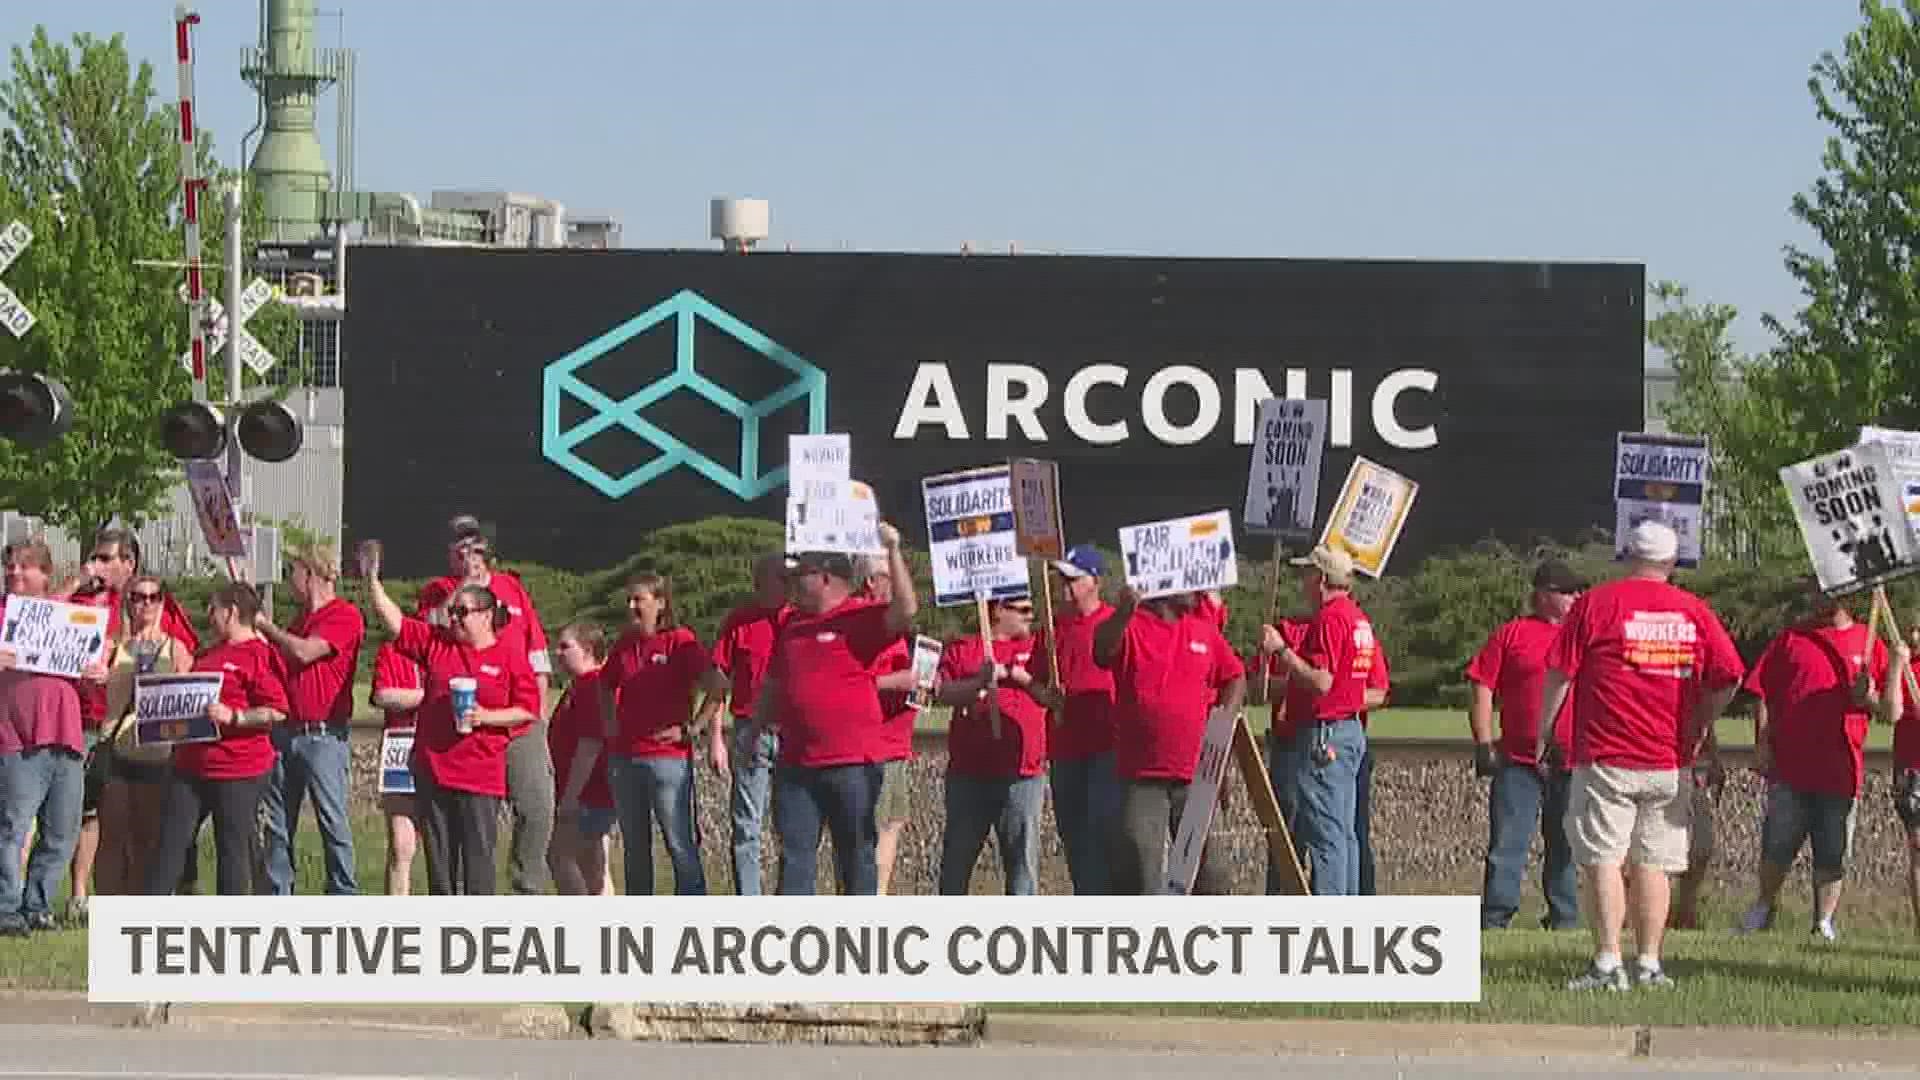 Not long after Local 105 members marched to Arconic with signs and chants, union leaders confirmed a deal had been made. It must now go through a voting process.